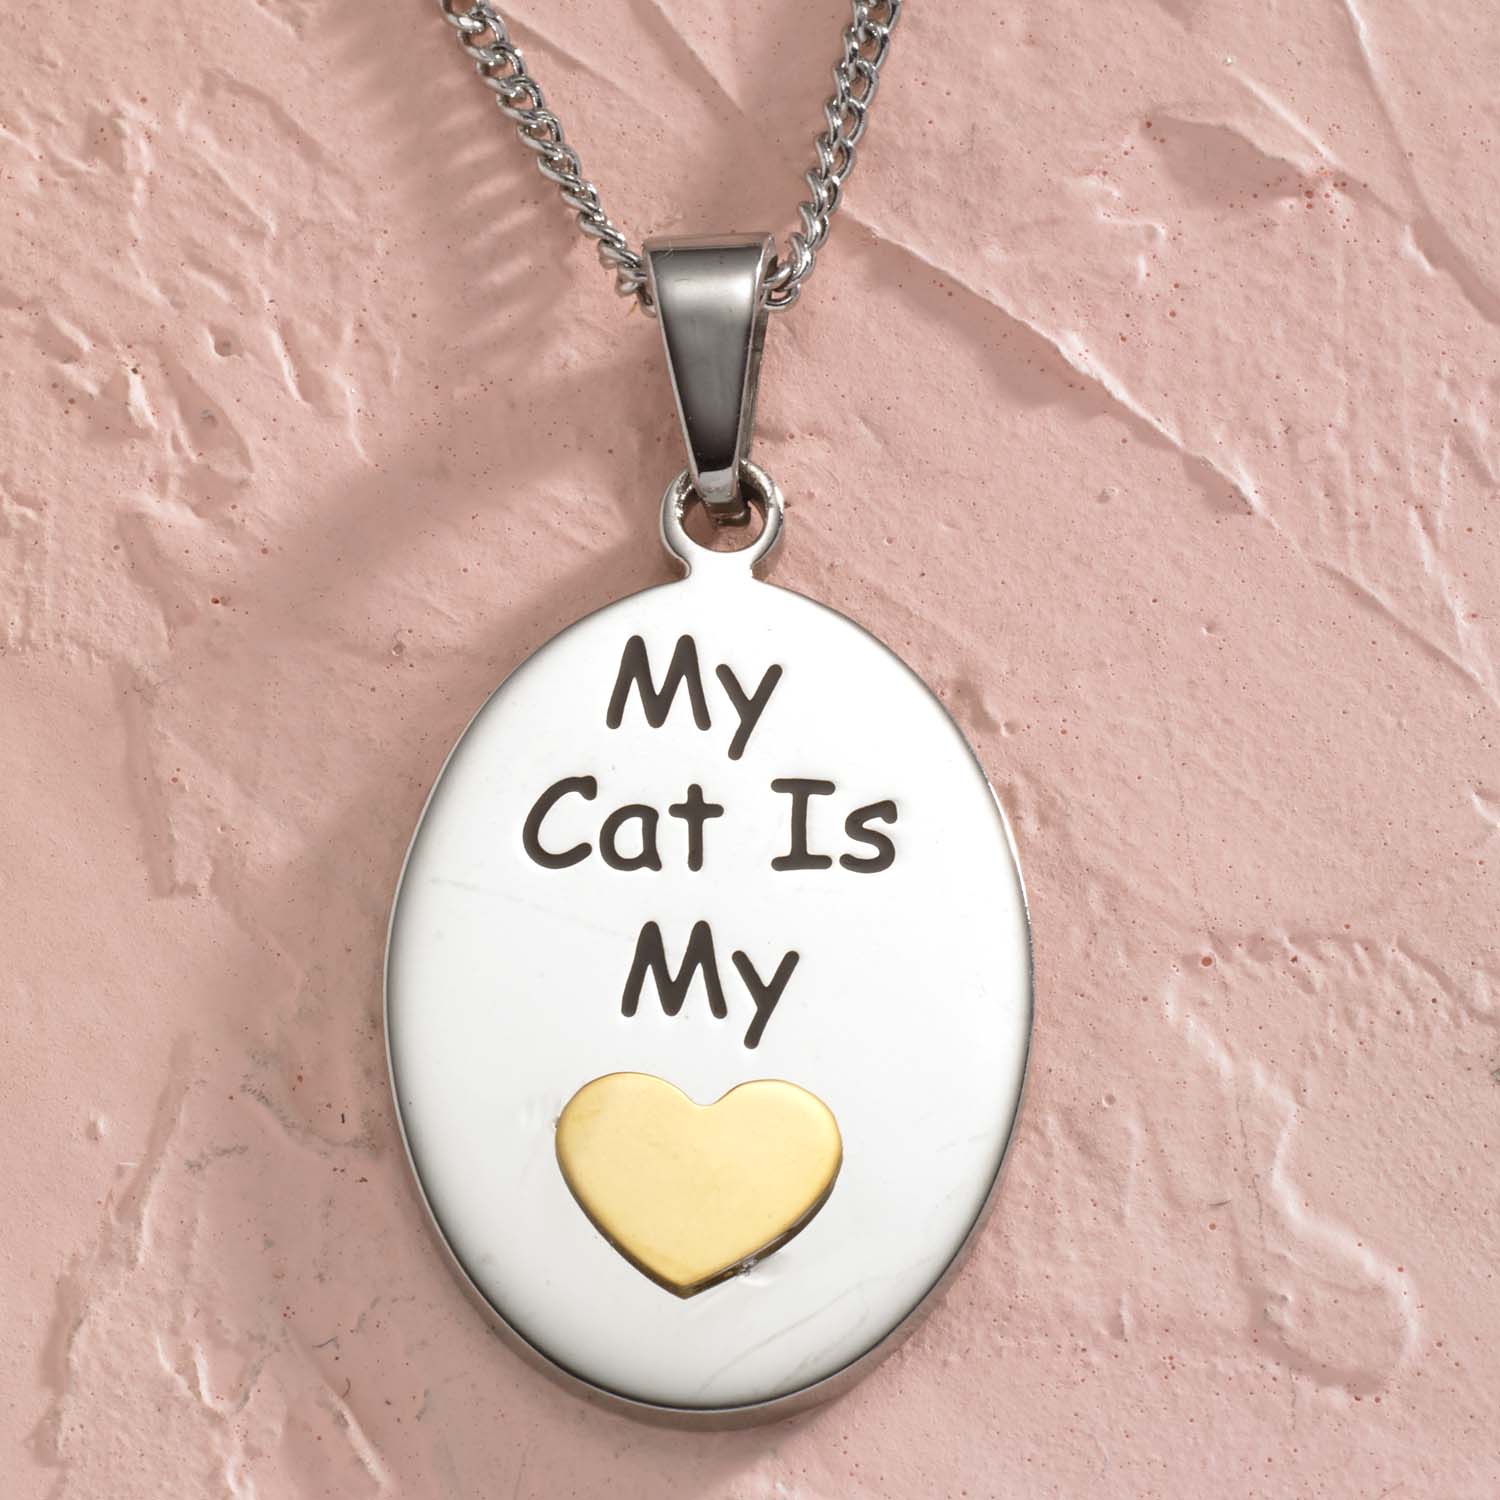 My Cat is My Heart Stainless Steel & Gold-Plated Pendant Necklace - Sentimental Cat Lover Jewelry Gift